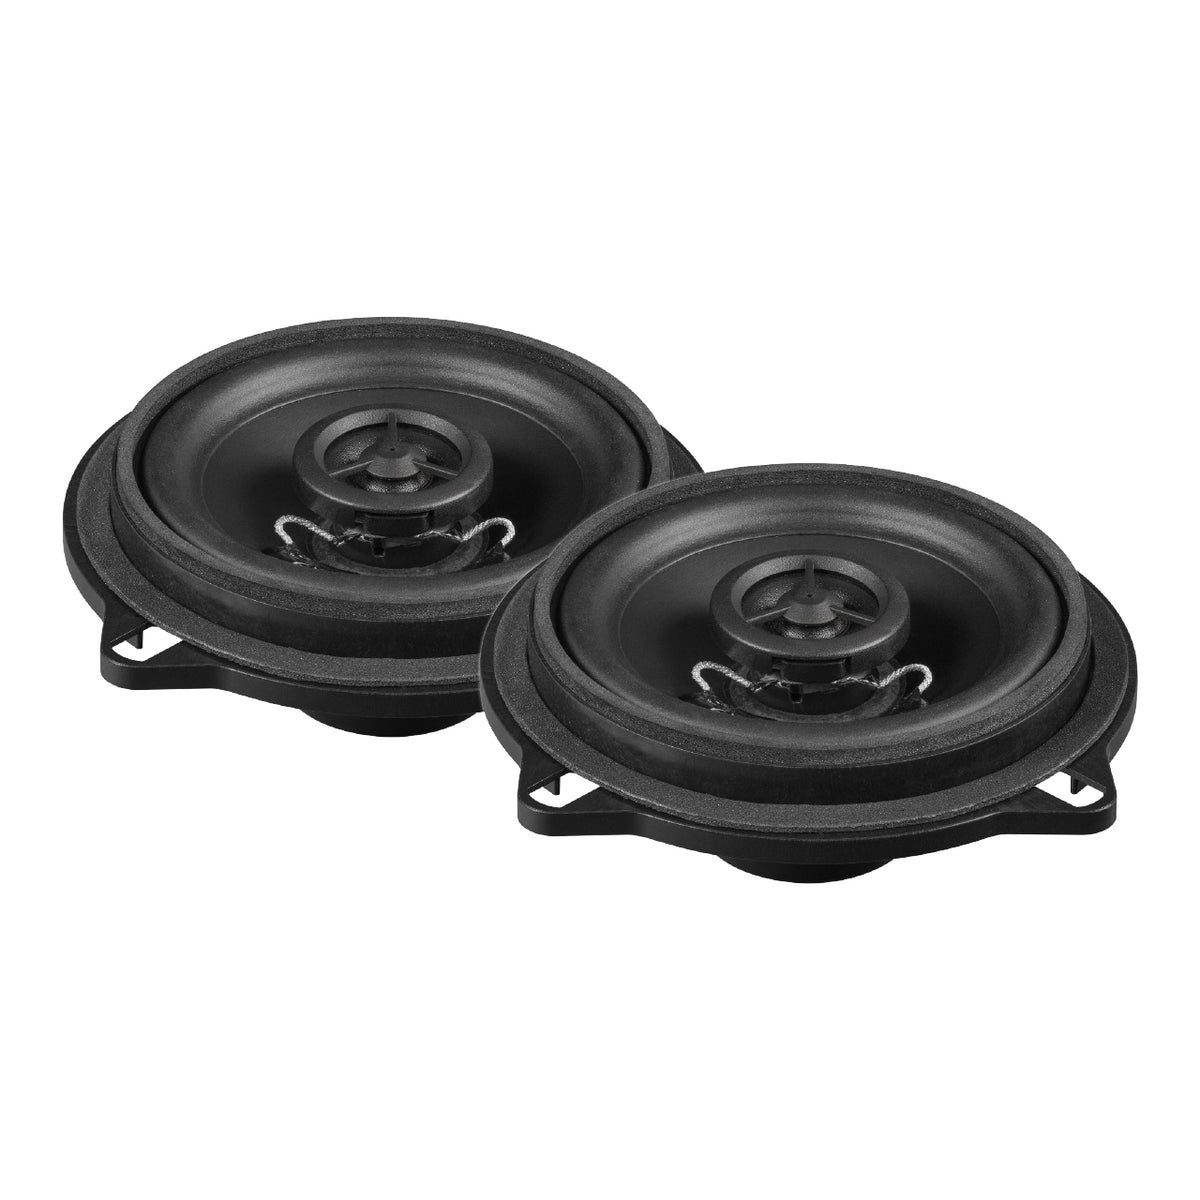 Match Up X4BMW-FRT.1 Coaxial Speakers